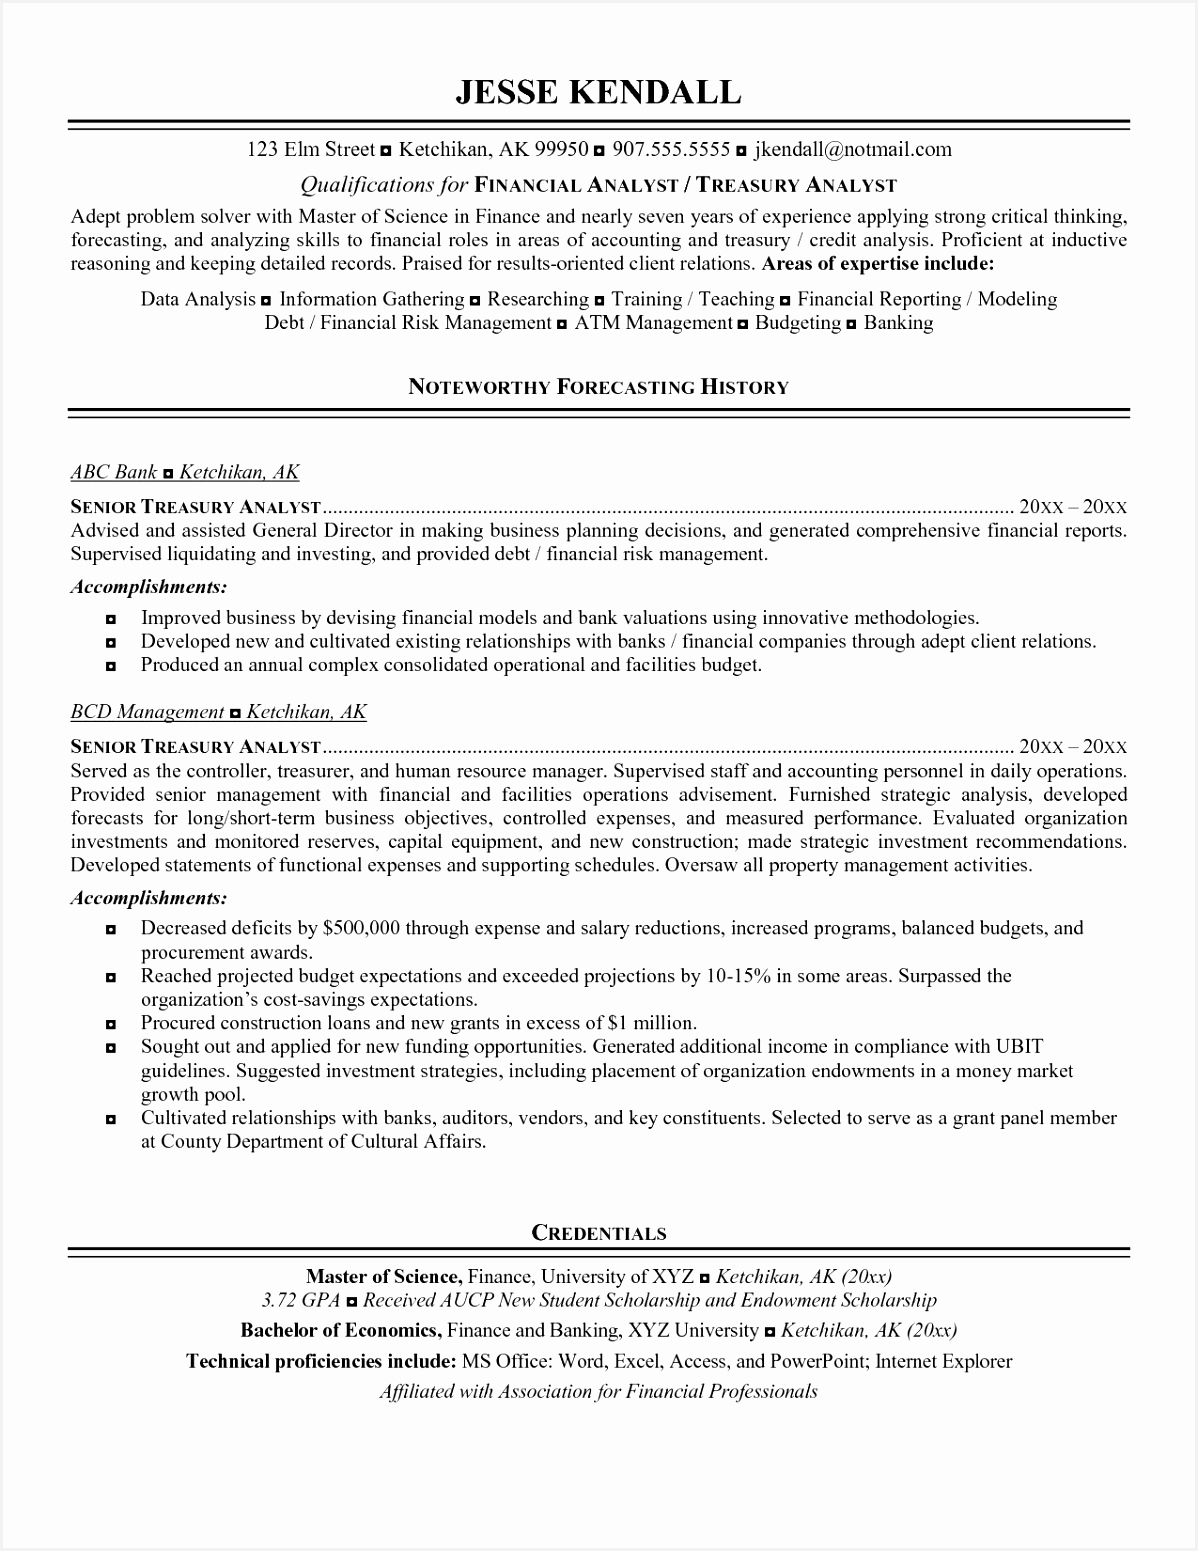 Financial Analyst Resume Sample Lovely Lovely Consulting Resume Examples Inspirational Od Consultant Cover 22 Awesome 155111987rkTb